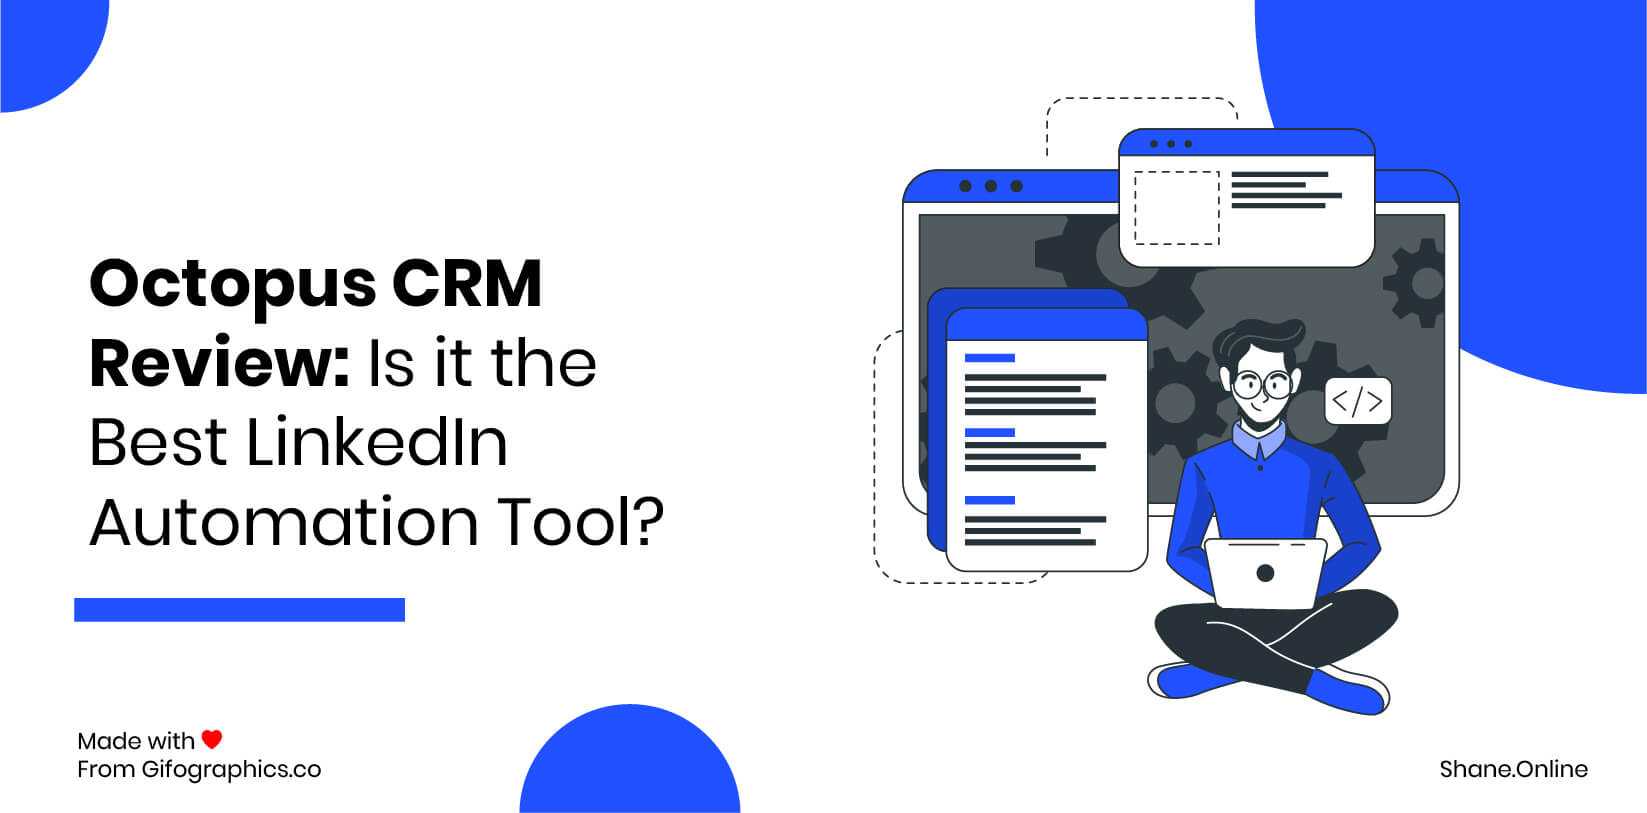 Octopus CRM Review : Is it the Best LinkedIn Automation Tool?